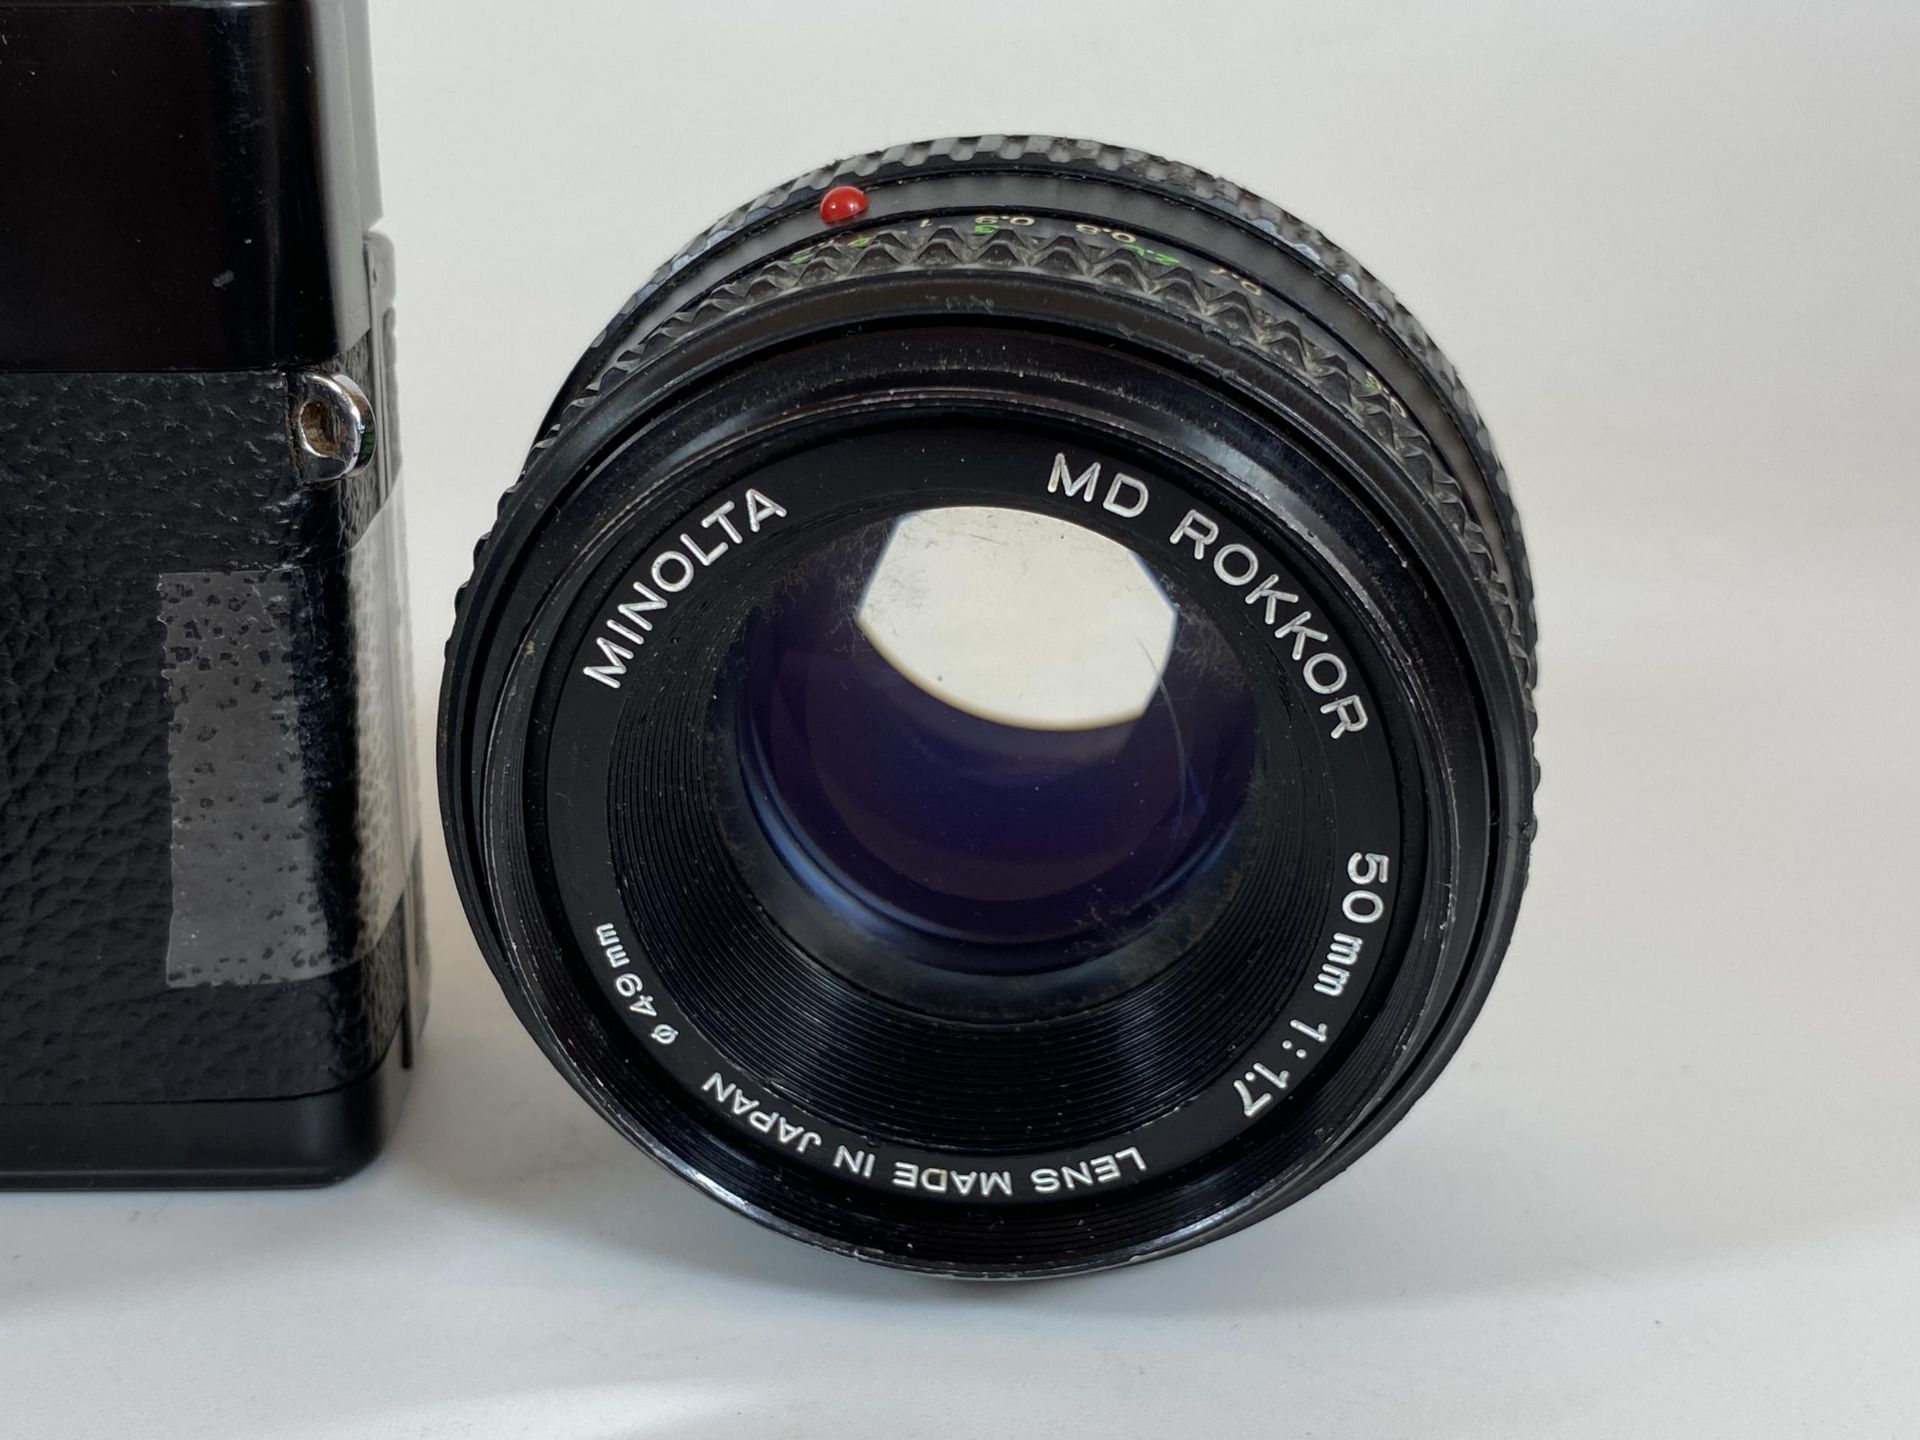 A MINOLTA CAMERA WITH 38MM 1:2.8 46MM LENS AND FURTHER MINOLTA MD ROKKOR 50MM 1:1.7 LENS - Image 2 of 4